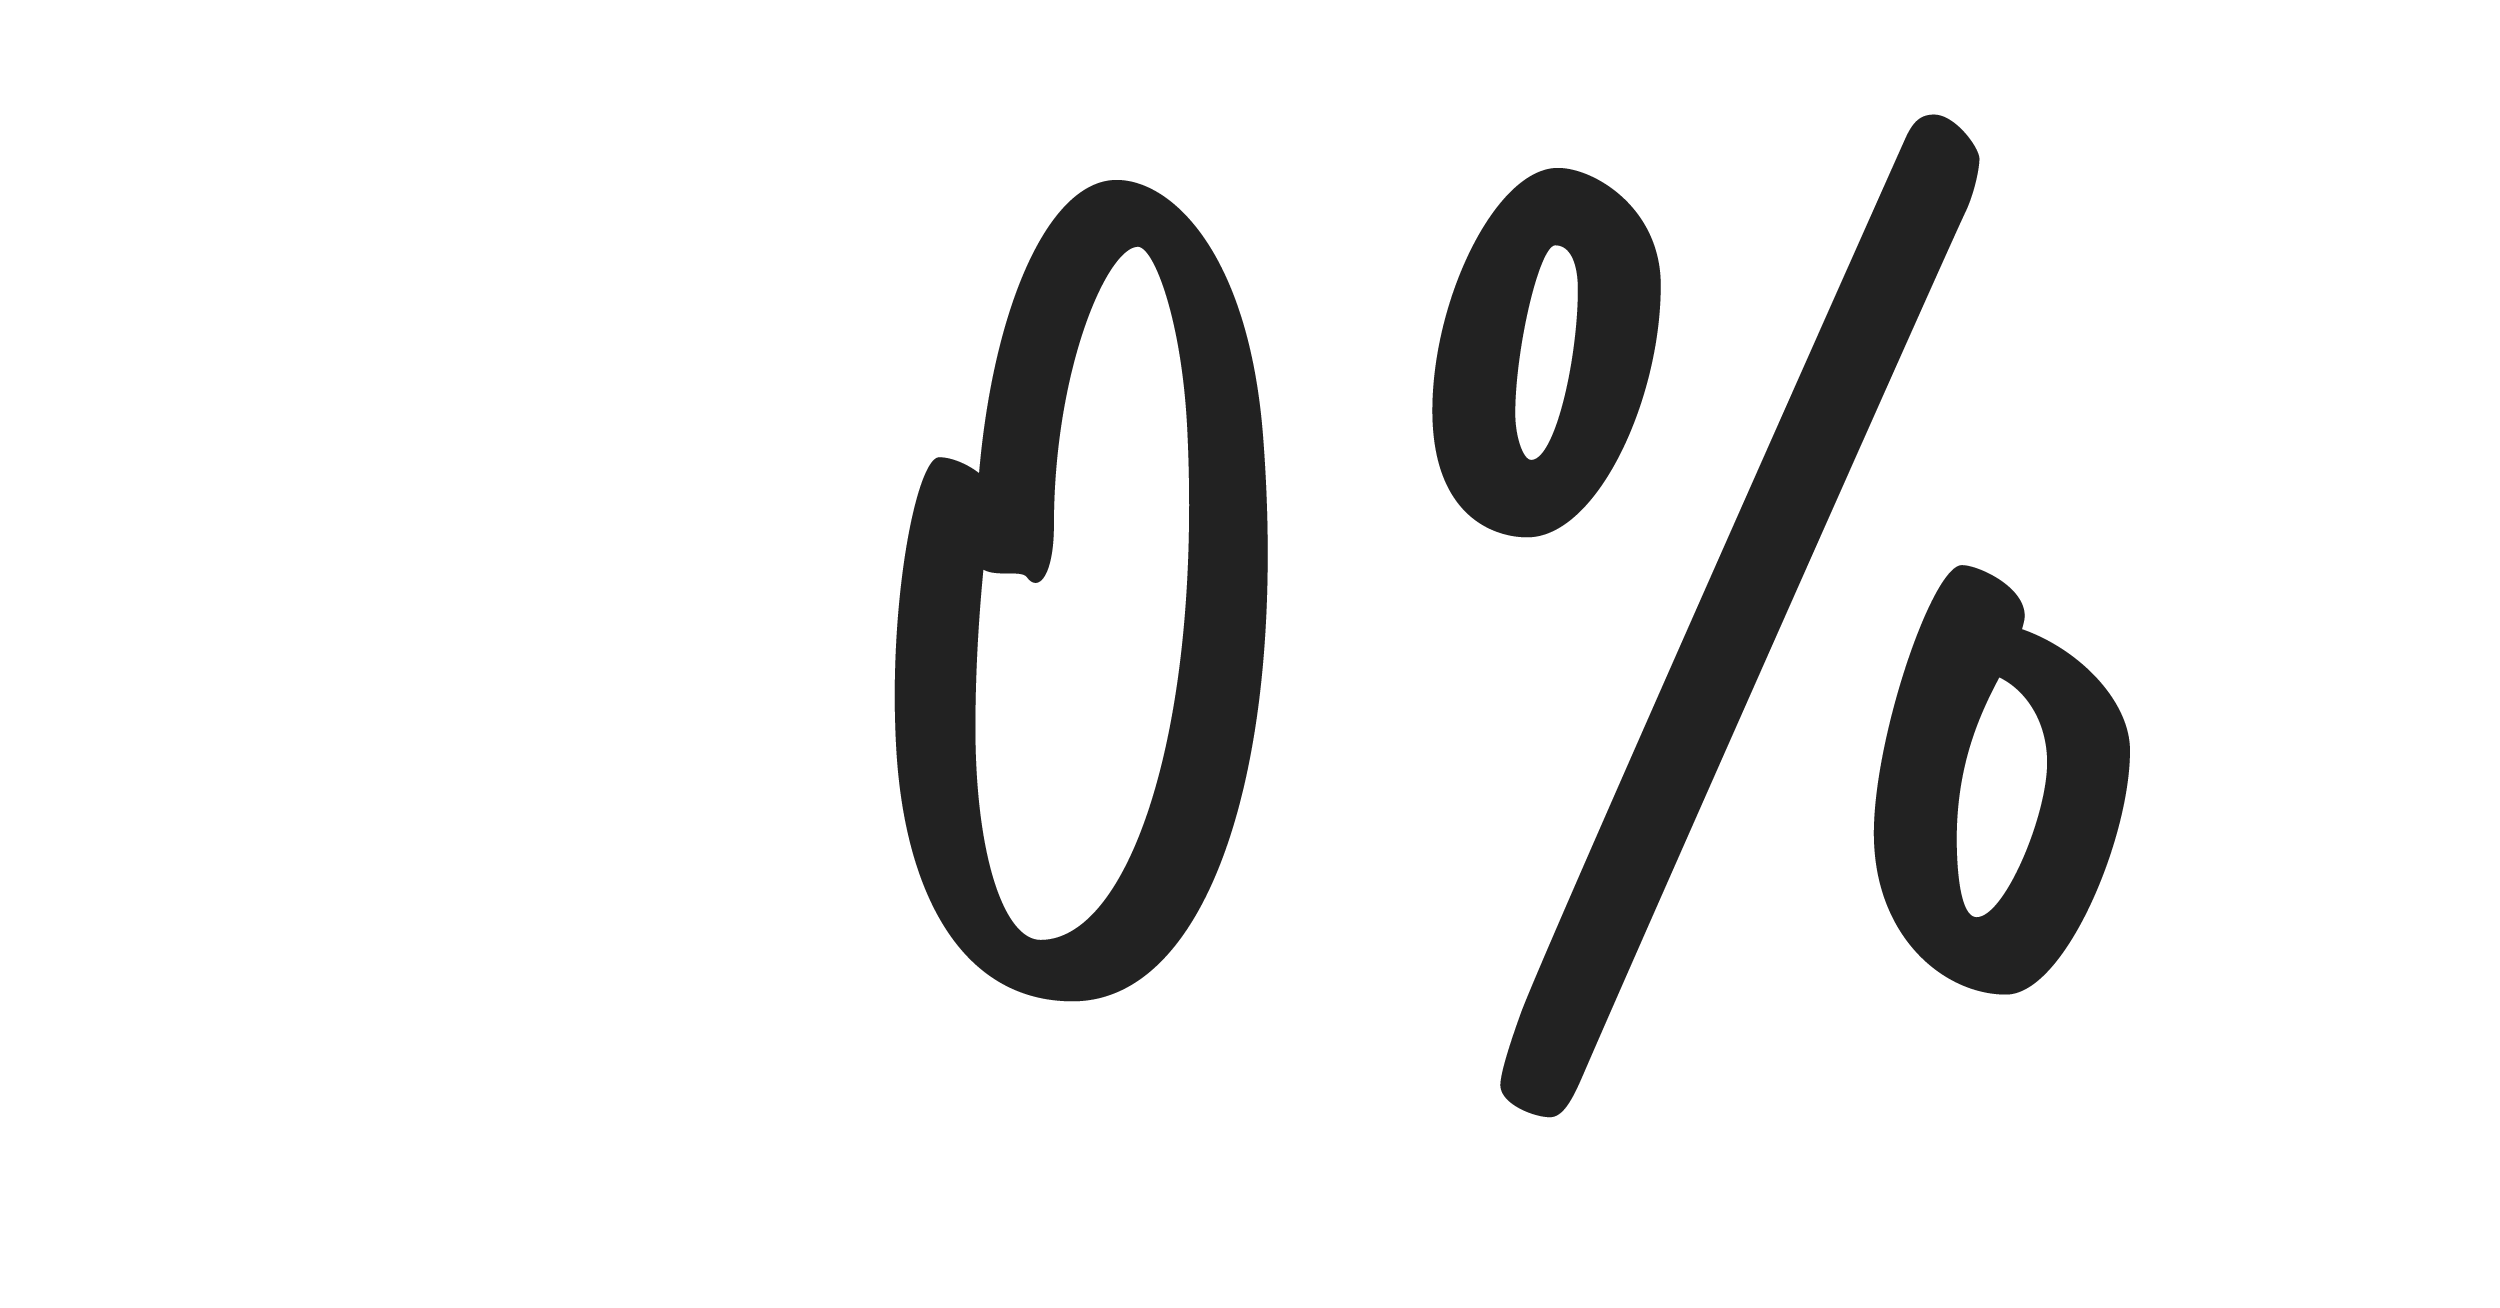 Count from 0% to 93%